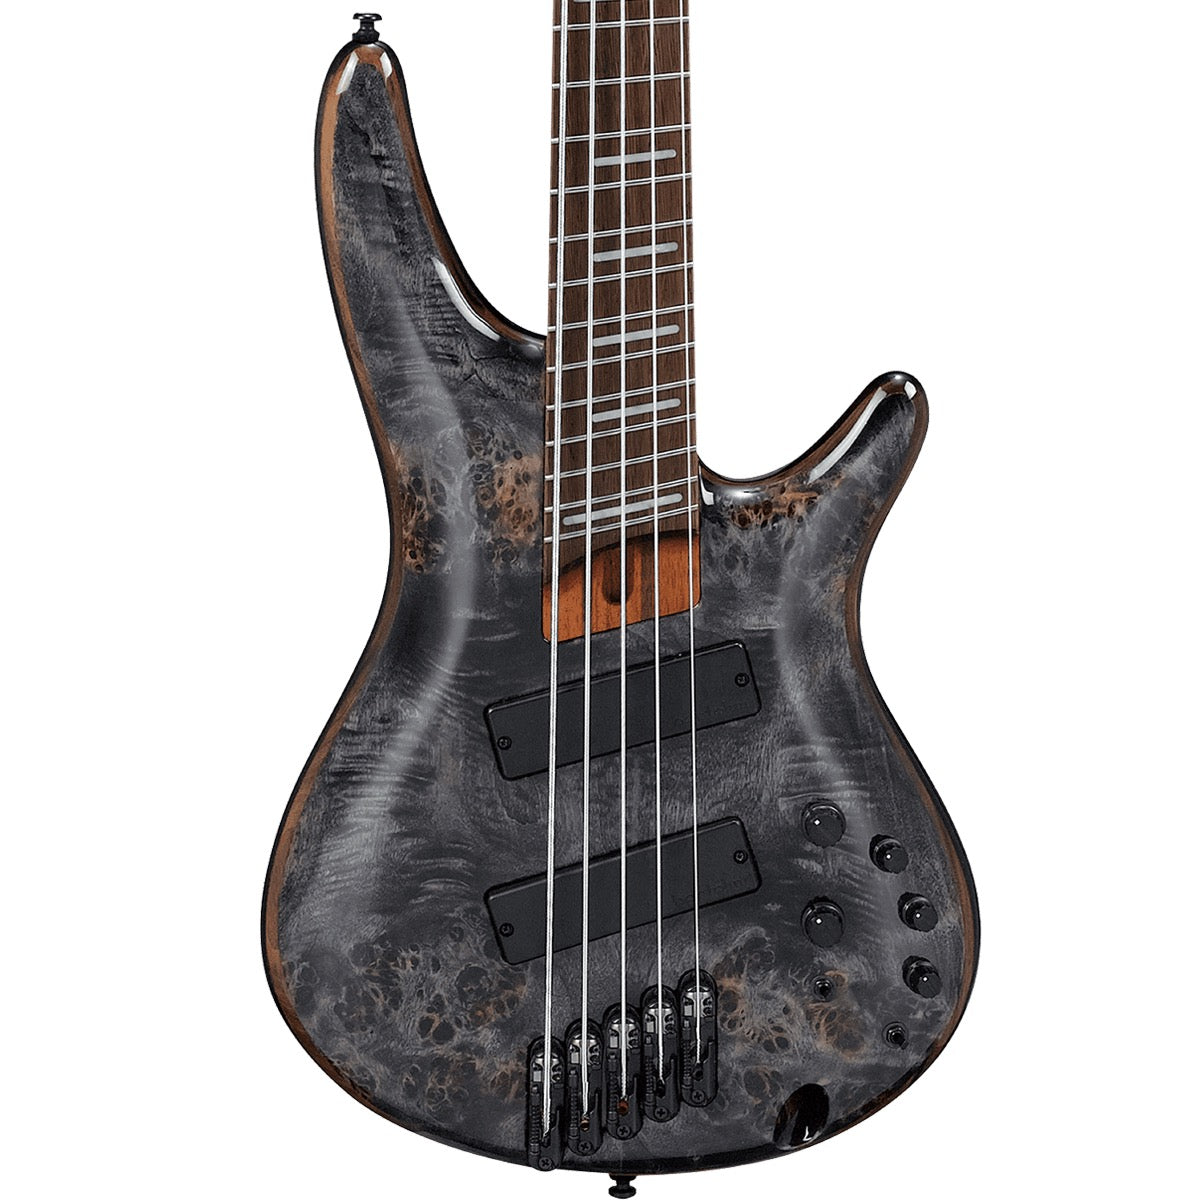 Ibanez Bass Workshop Multi-Scale 5 String Electric Bass - Deep Twilight